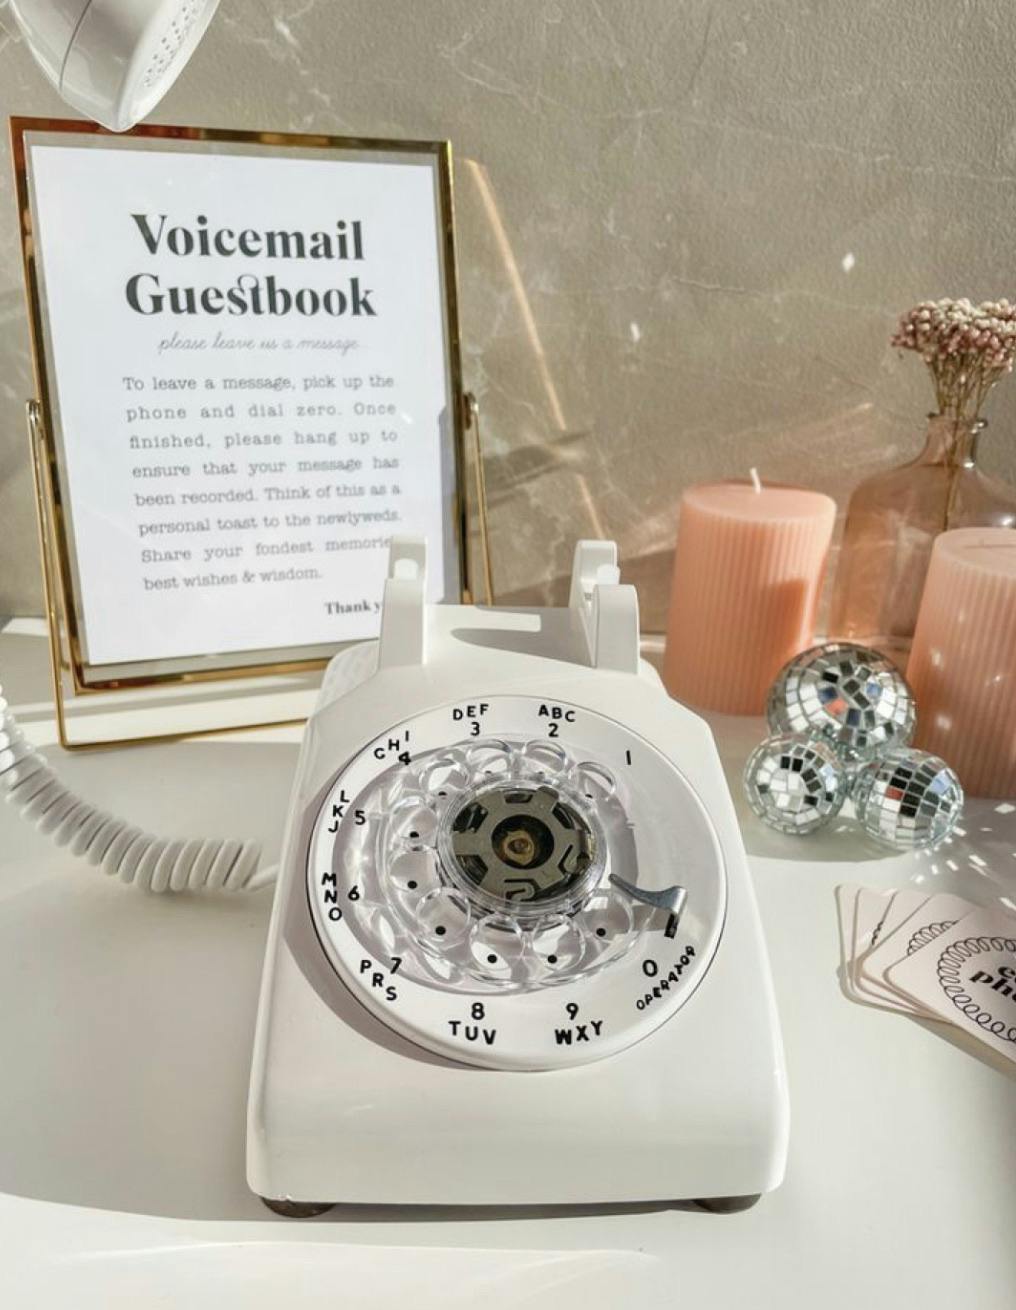 Voicemail guestbook 